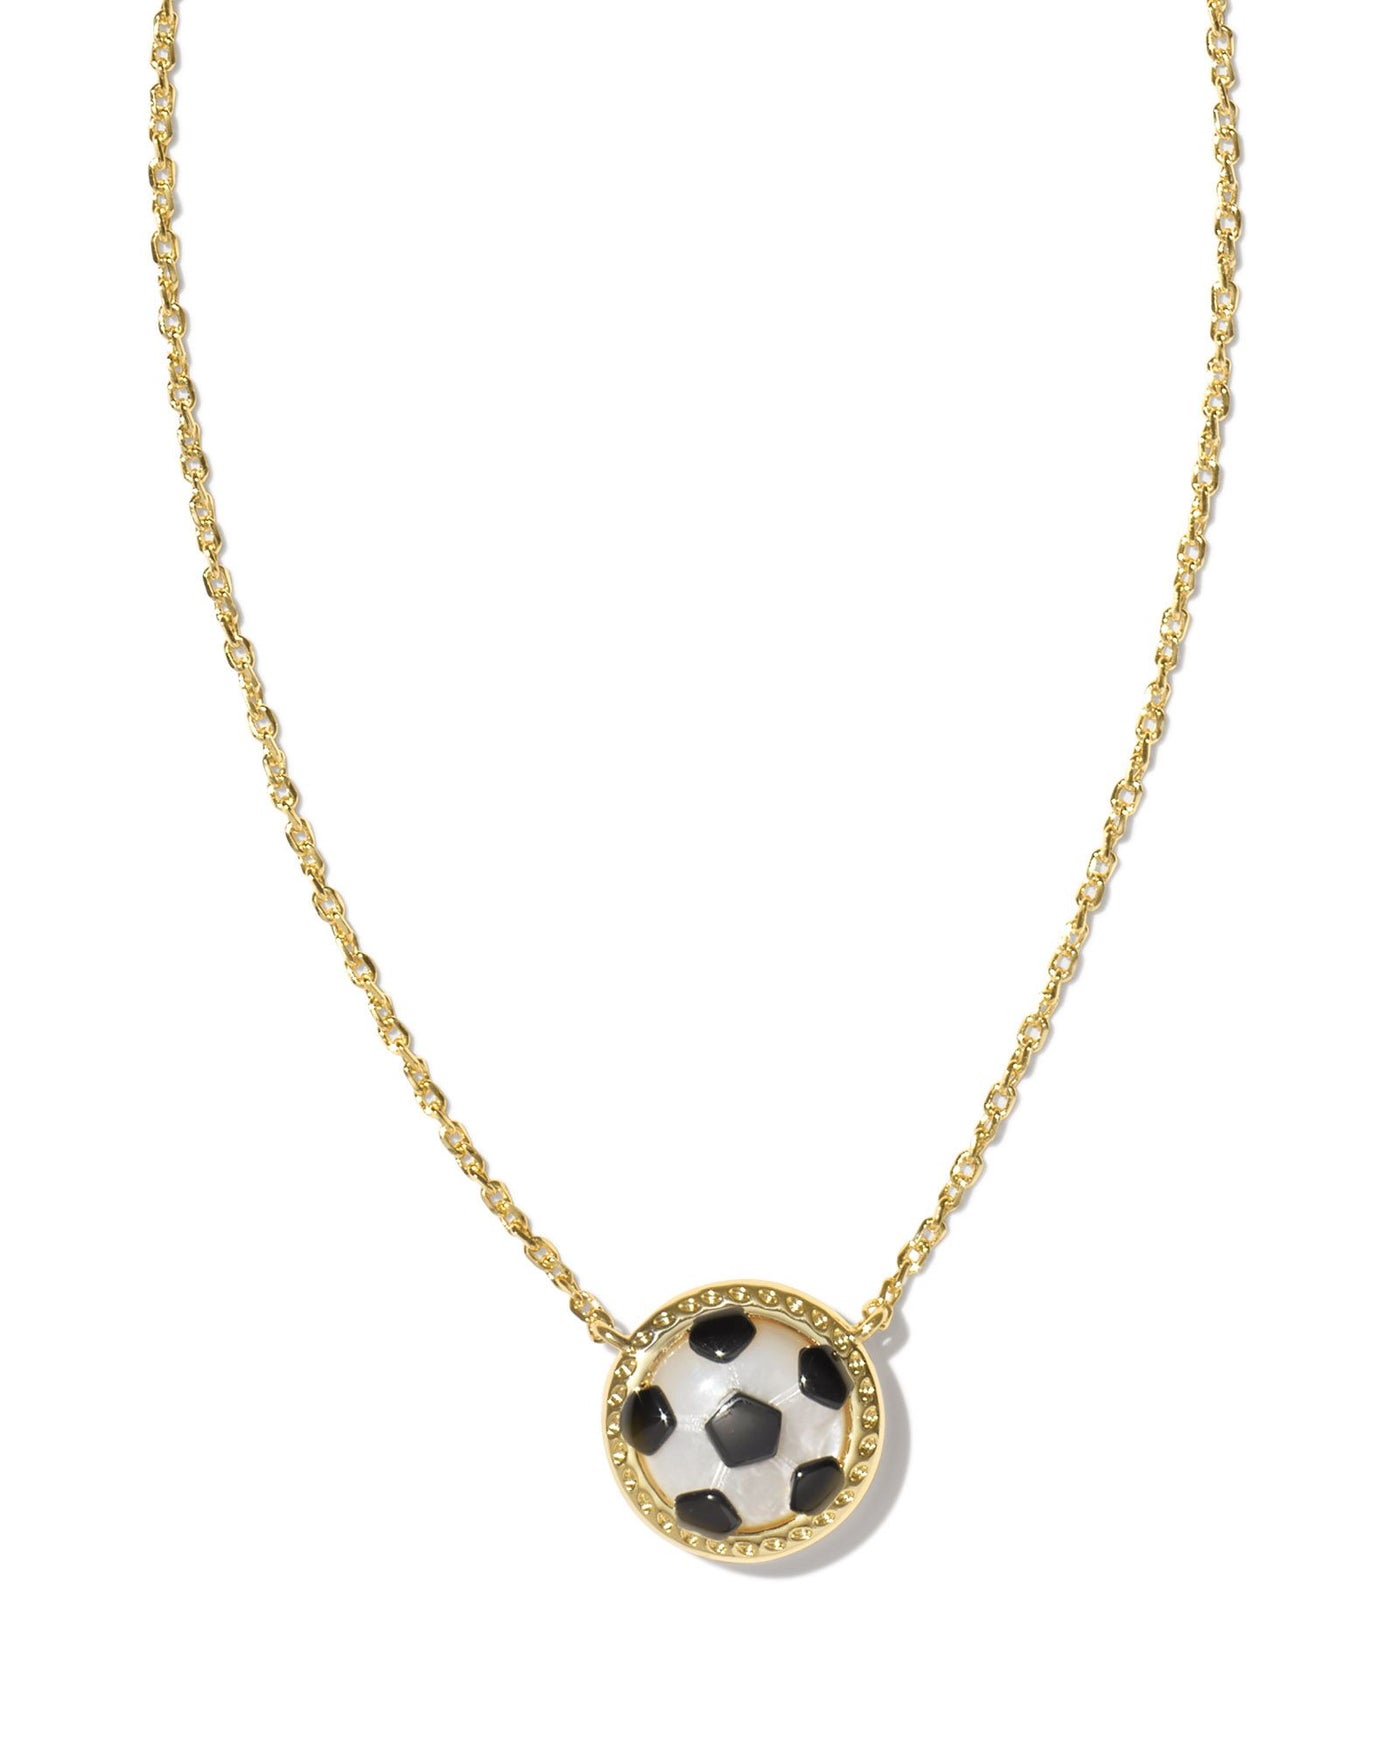 Kendra Scott Soccer Pendant Necklace in Gold on white background close up.